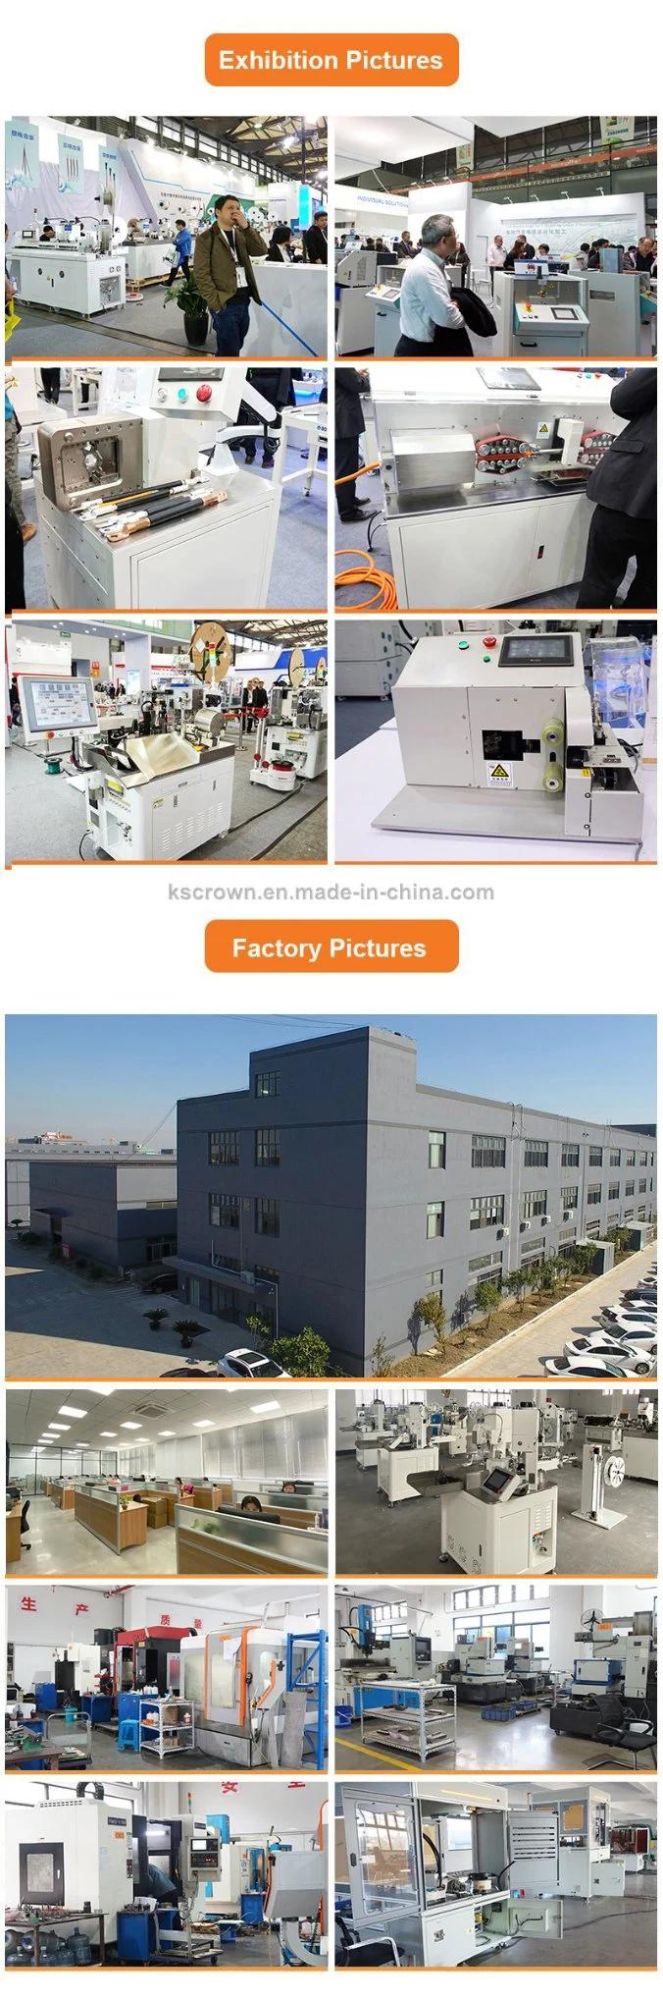 Computer Flat Cable Stripping Machine Ribbon Cable Cutting Stripping Machine